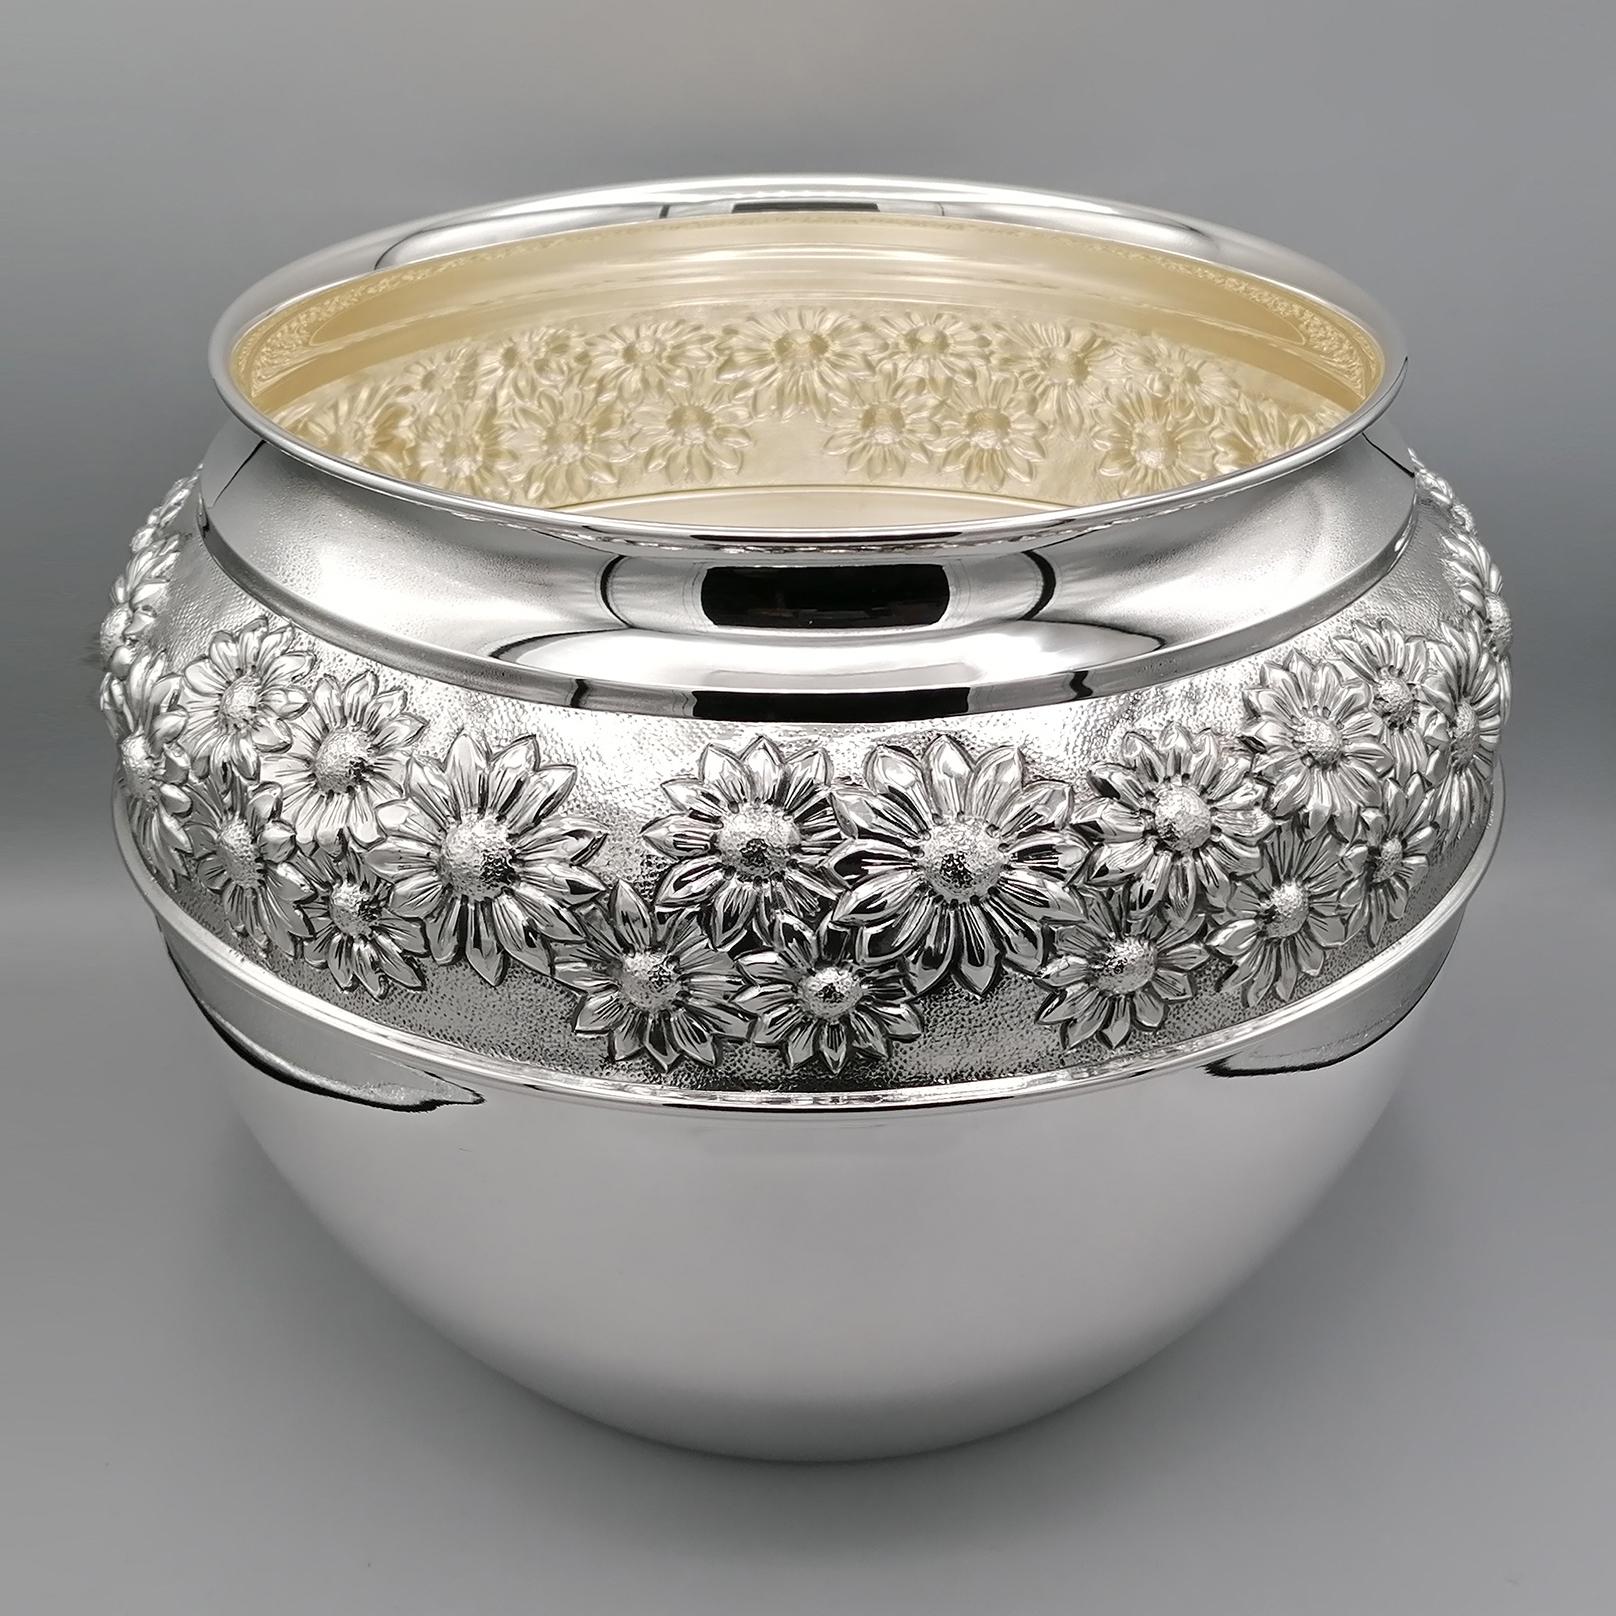 Gorgeous sterling silver centerpiece.
The body shape is round and smooth decorated with an embossed and chiseled band with flower motifs.
In the spaces between one flower and another, knurling has been made to make the flowers stand out.
The